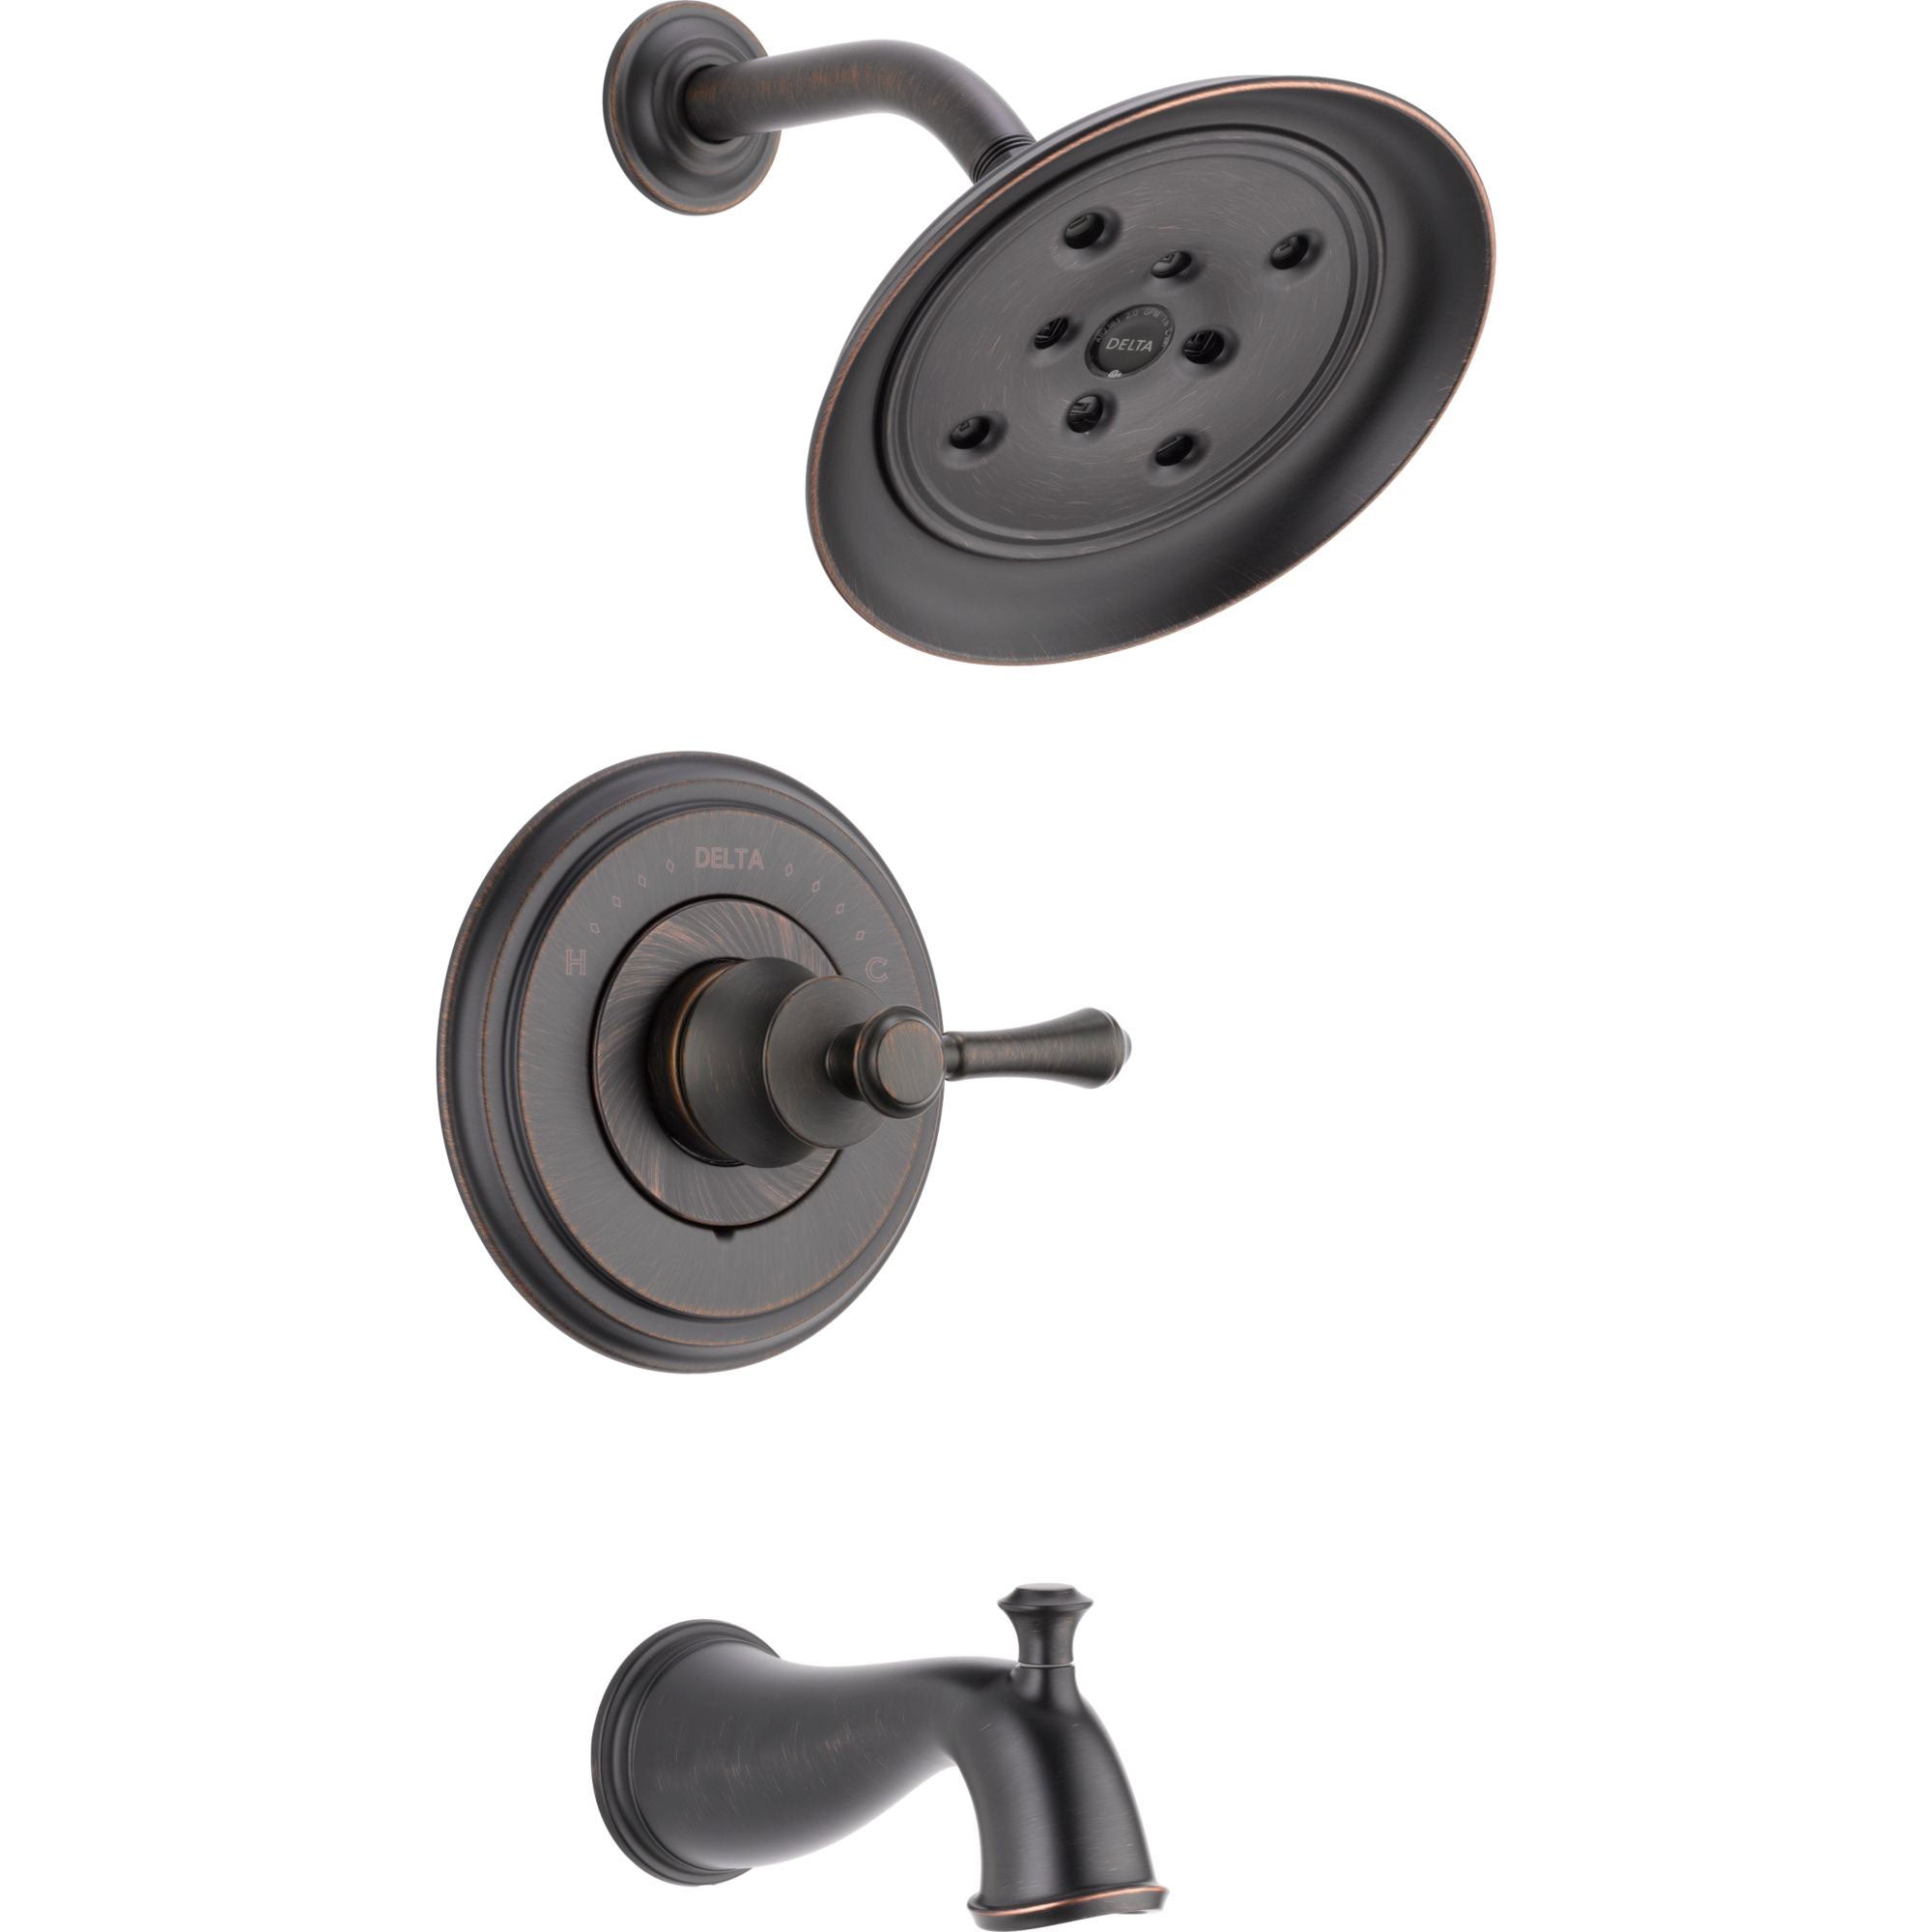 Delta Cassidy Venetian Bronze 14 Series Tub and Shower Combination Faucet INCLUDES Rough-in Valve with Stops and Single Lever Handle D1163V